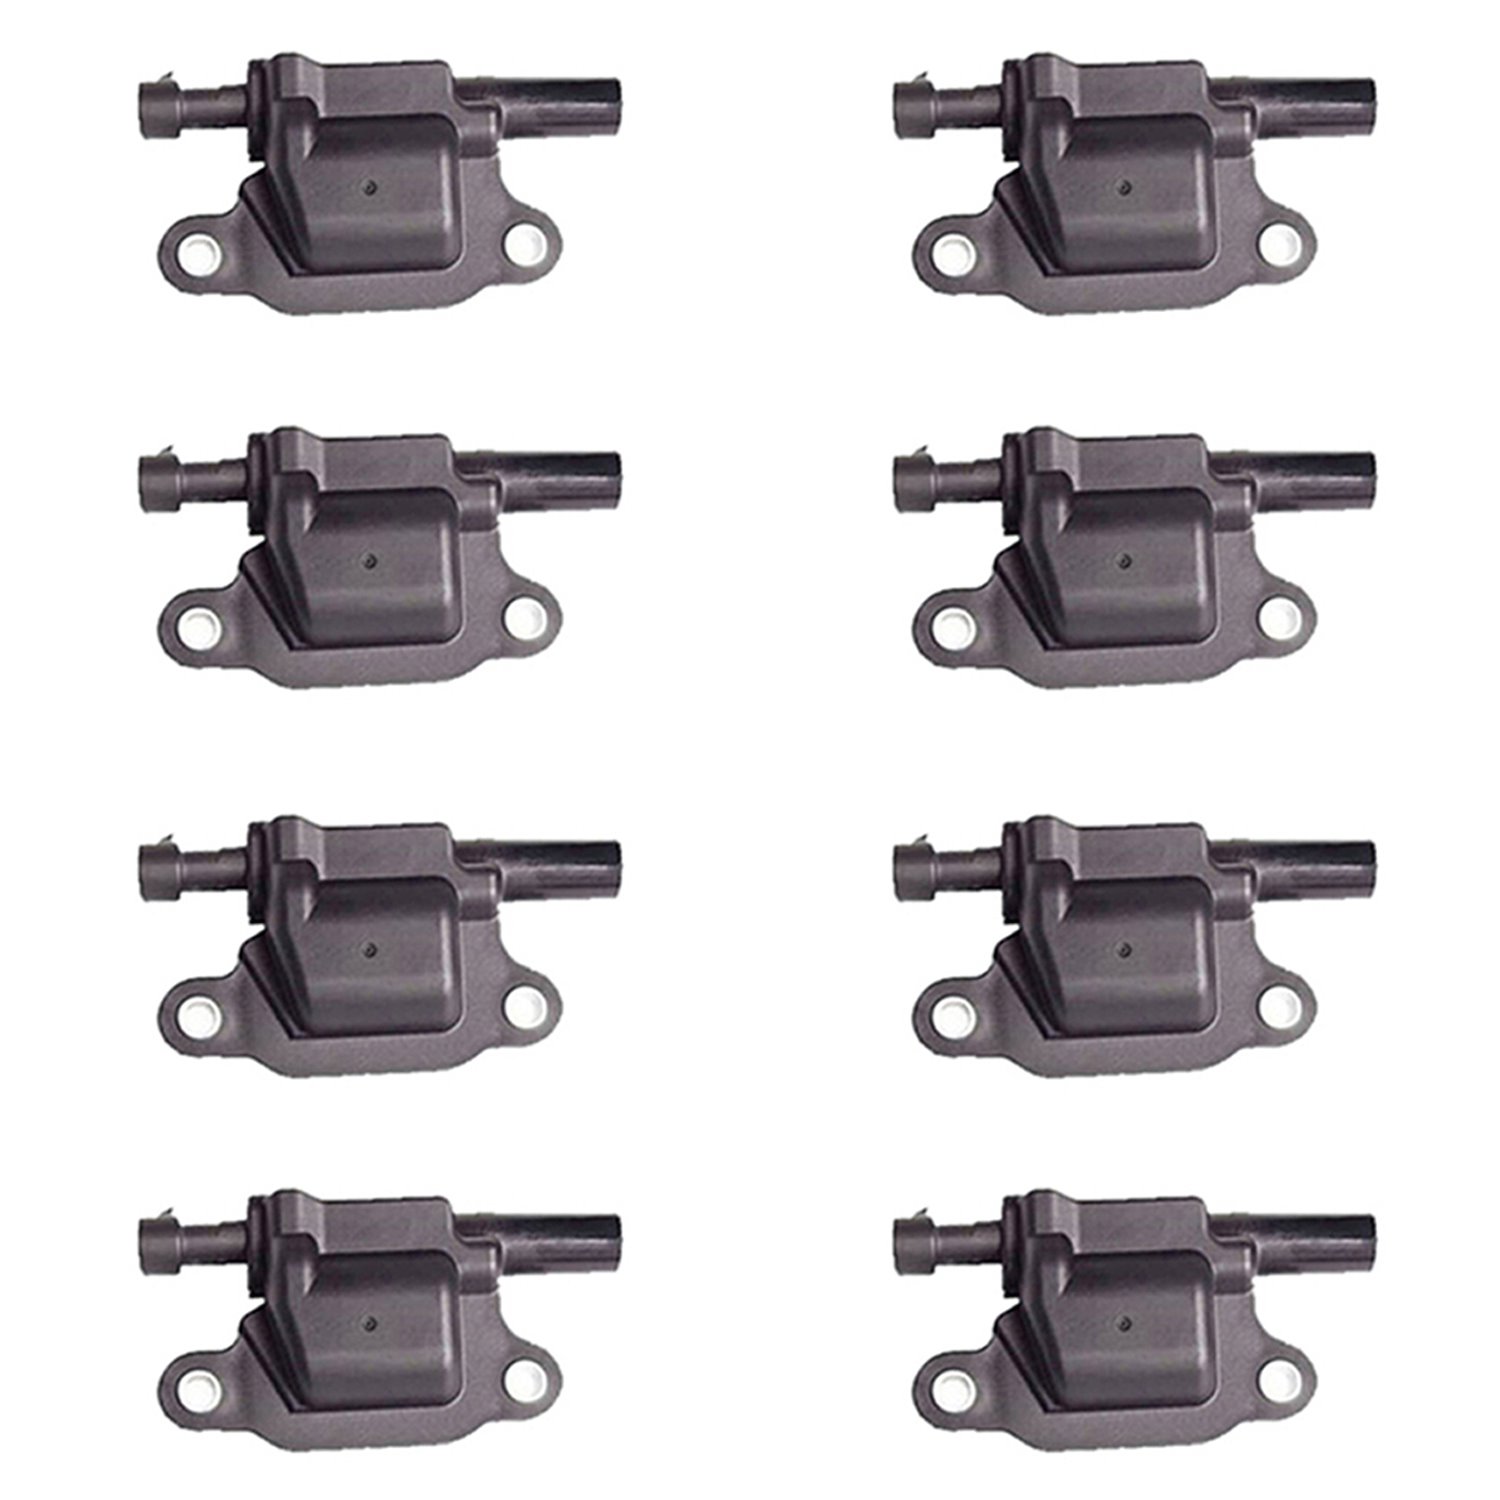 OE Replacement Ignition Coils for GM V8 5.3L/6.0L/6.2L